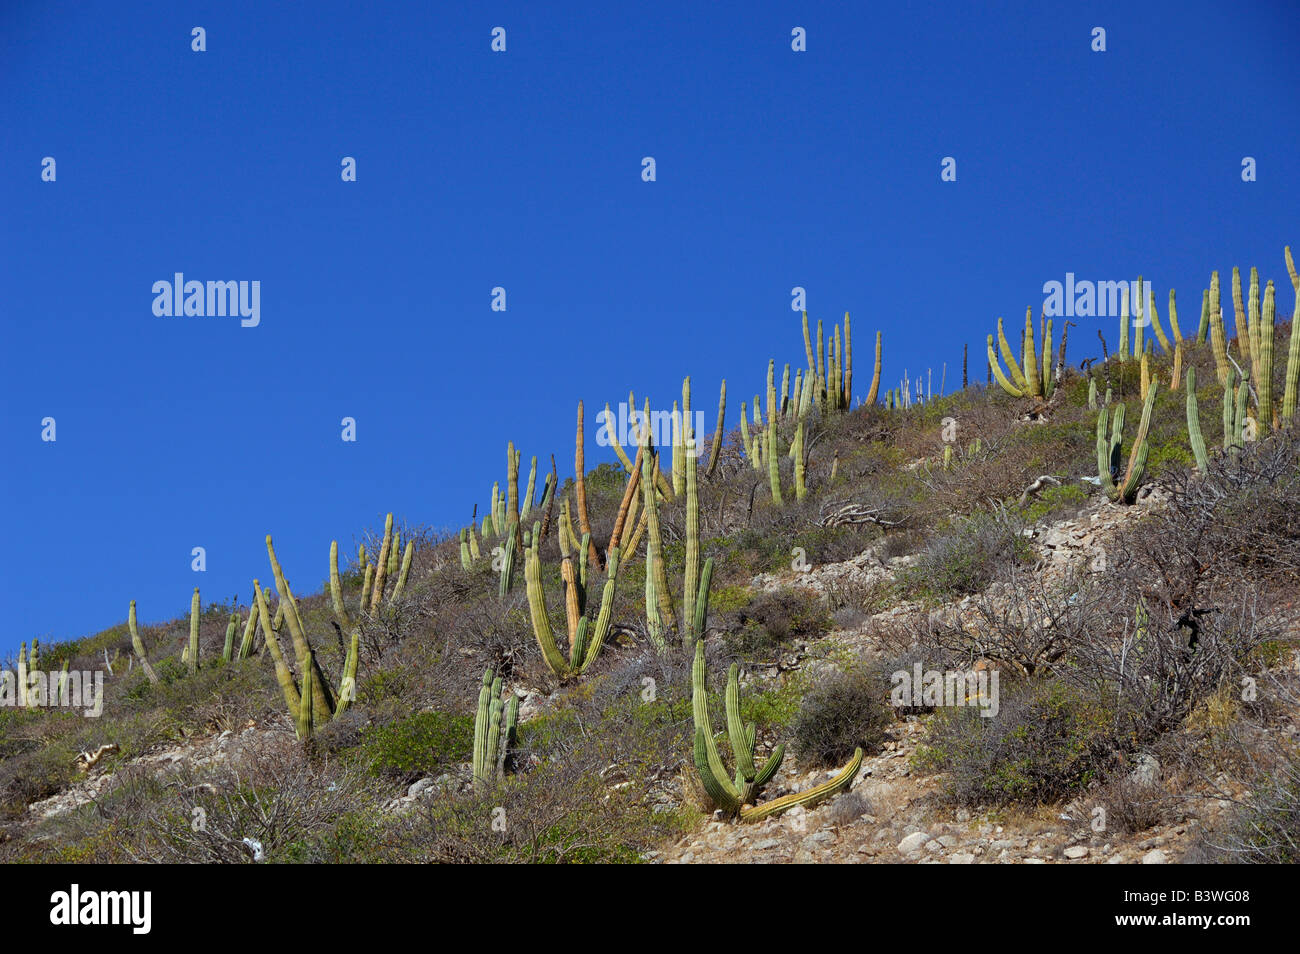 Mexico, San Carlos. Organ Pipe cactus.THIS IMAGE HAS SOME RESTRICTIONS FOR US LAND TOUR OPERATORS. PLEASE CALL FOR INFORMATION. Stock Photo